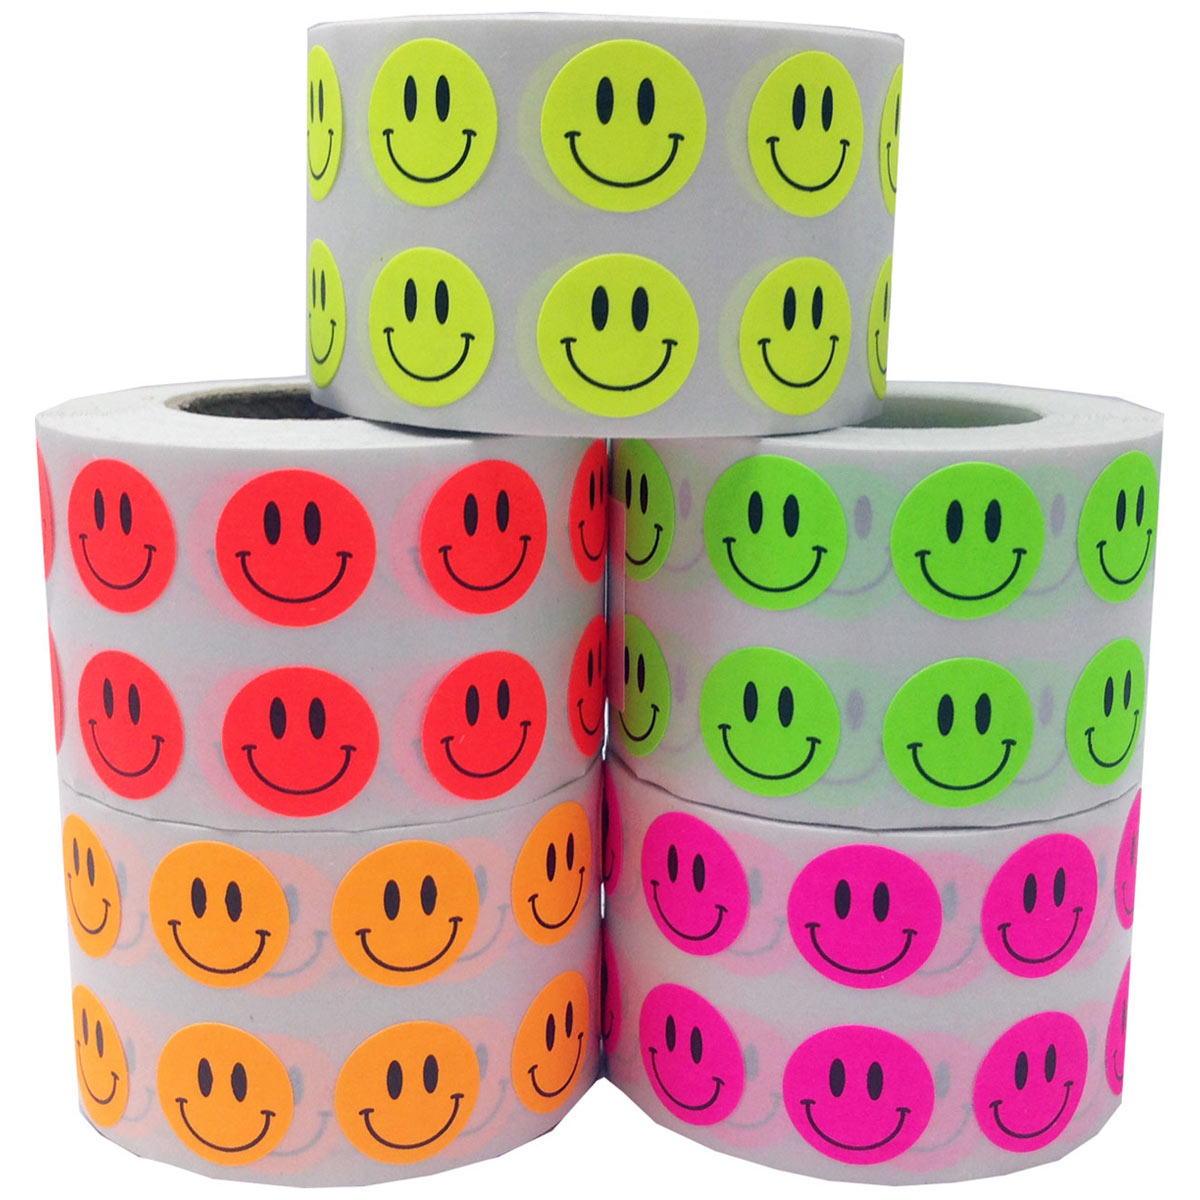 Smiley Face Stickers (35 Stickers - 20mm)